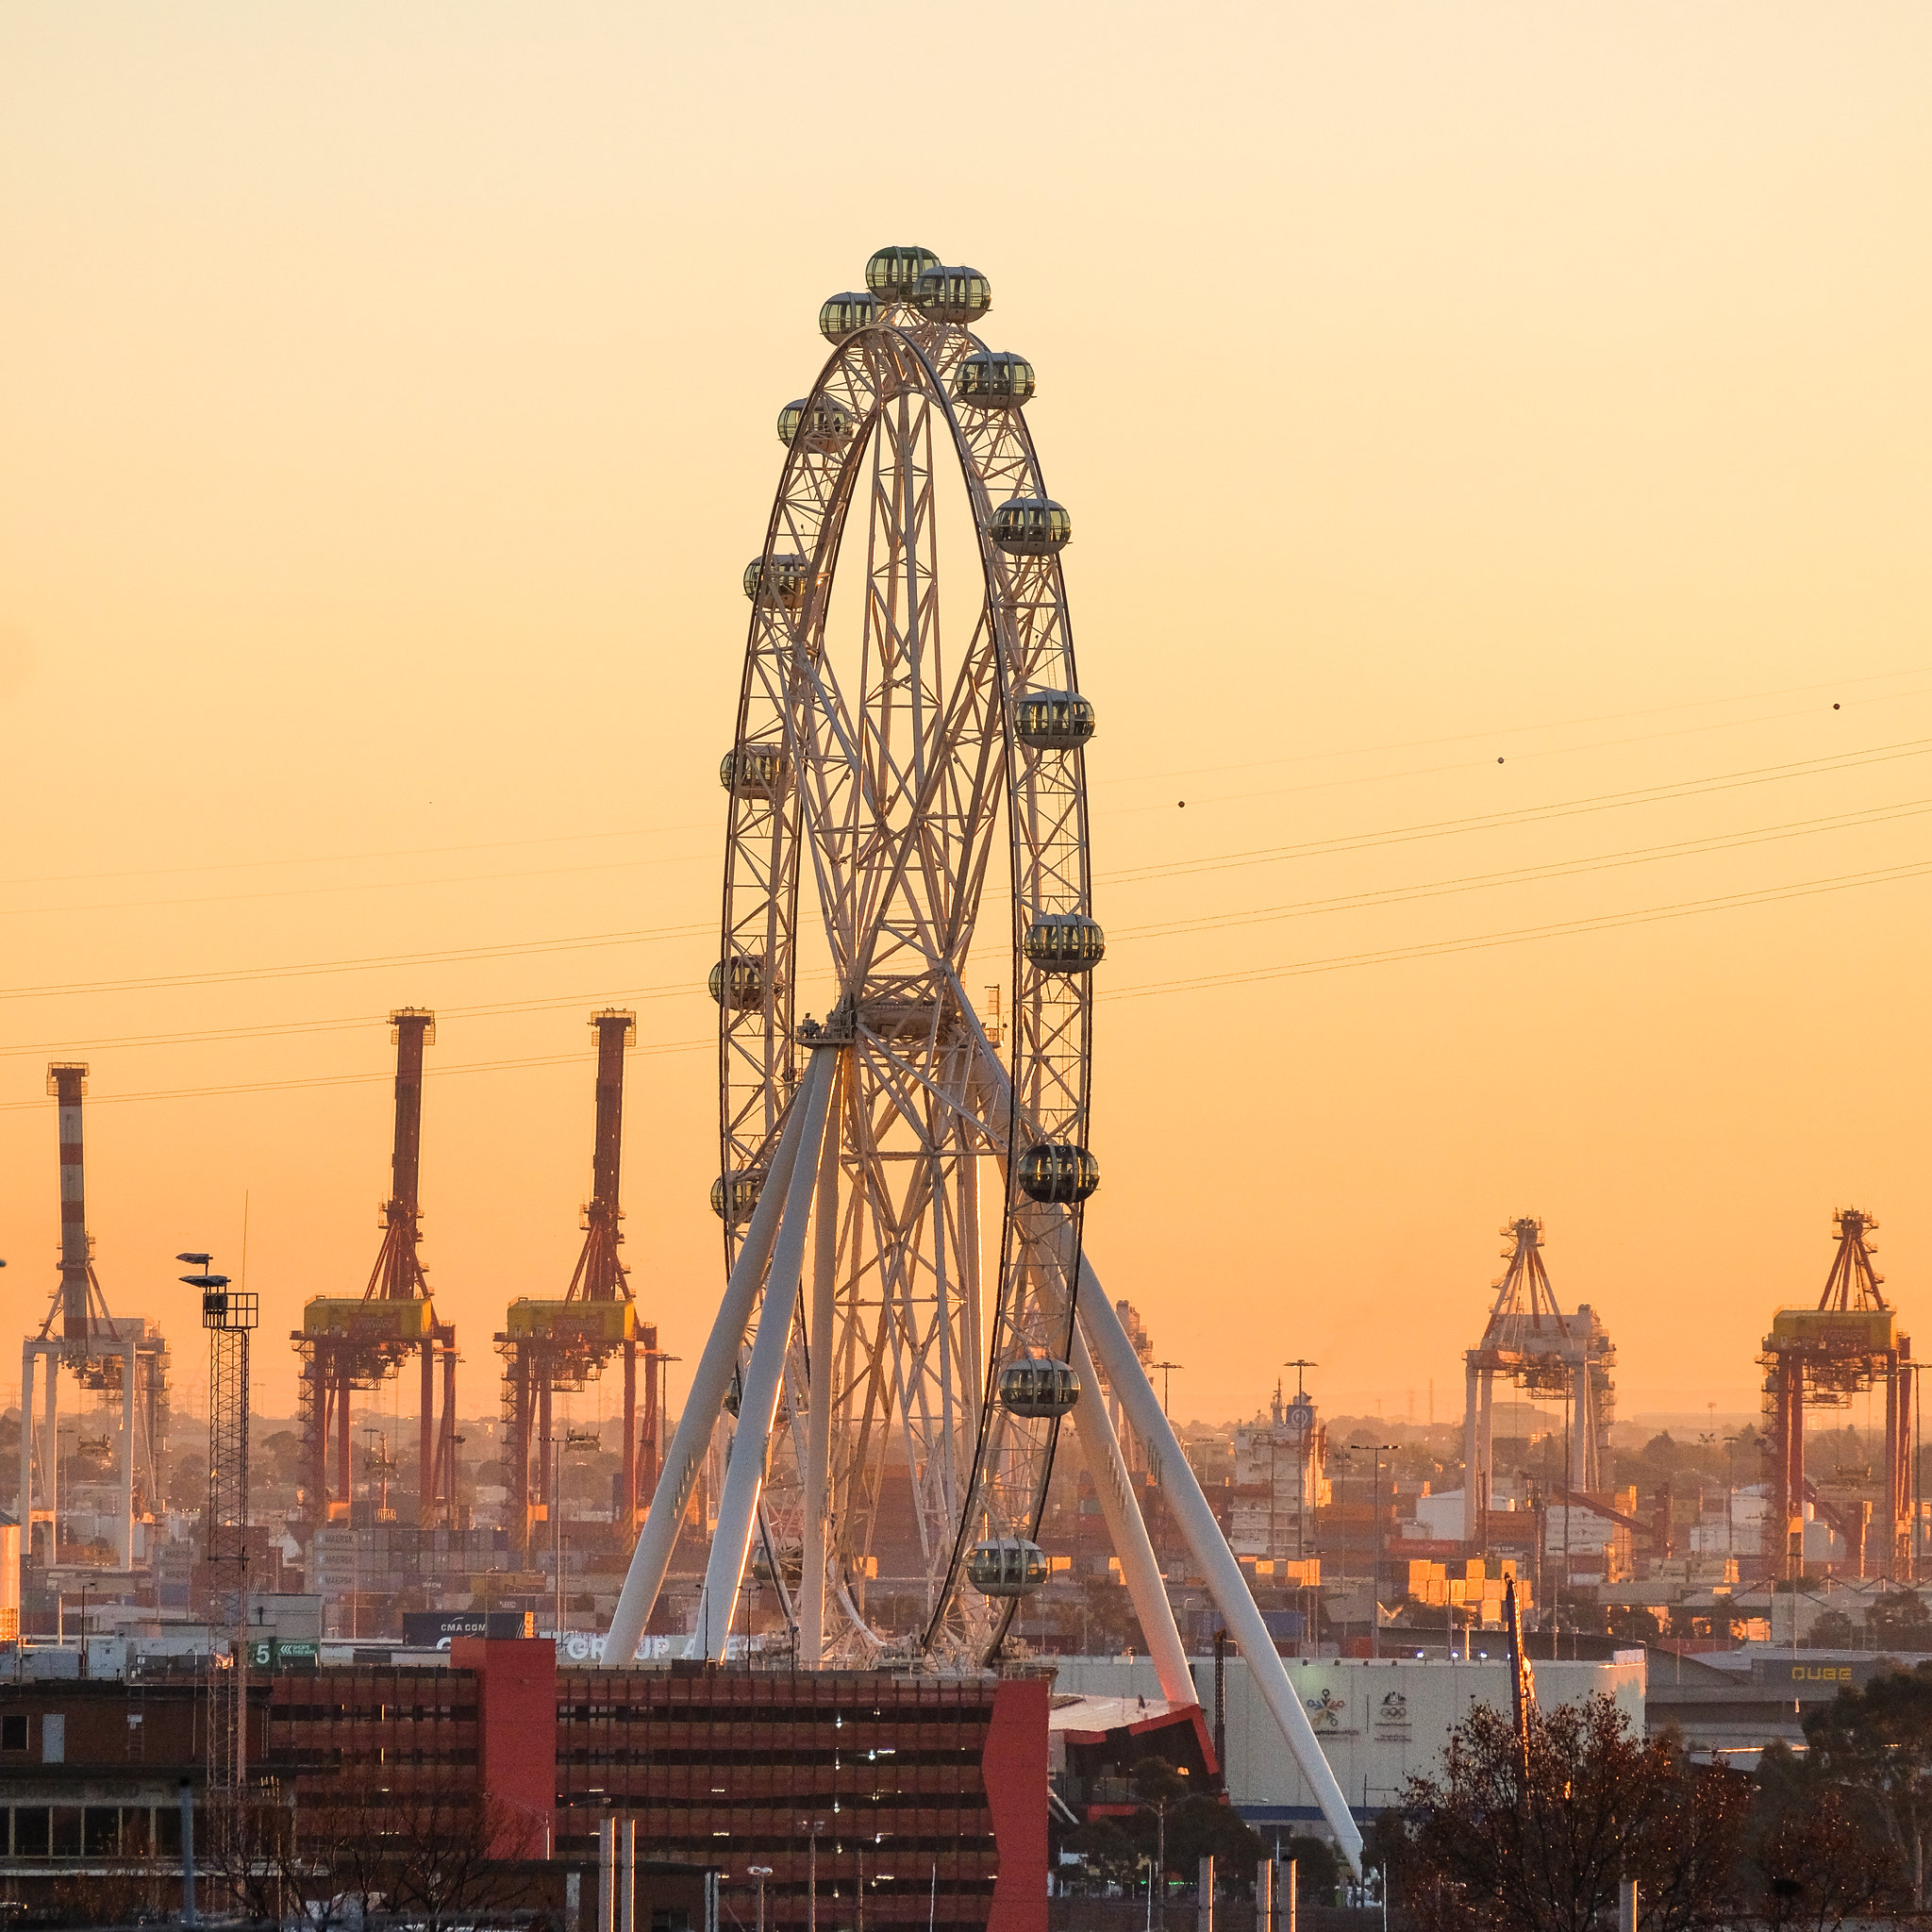 cities, sunset, city, ferris wheel, attraction, port High Definition image